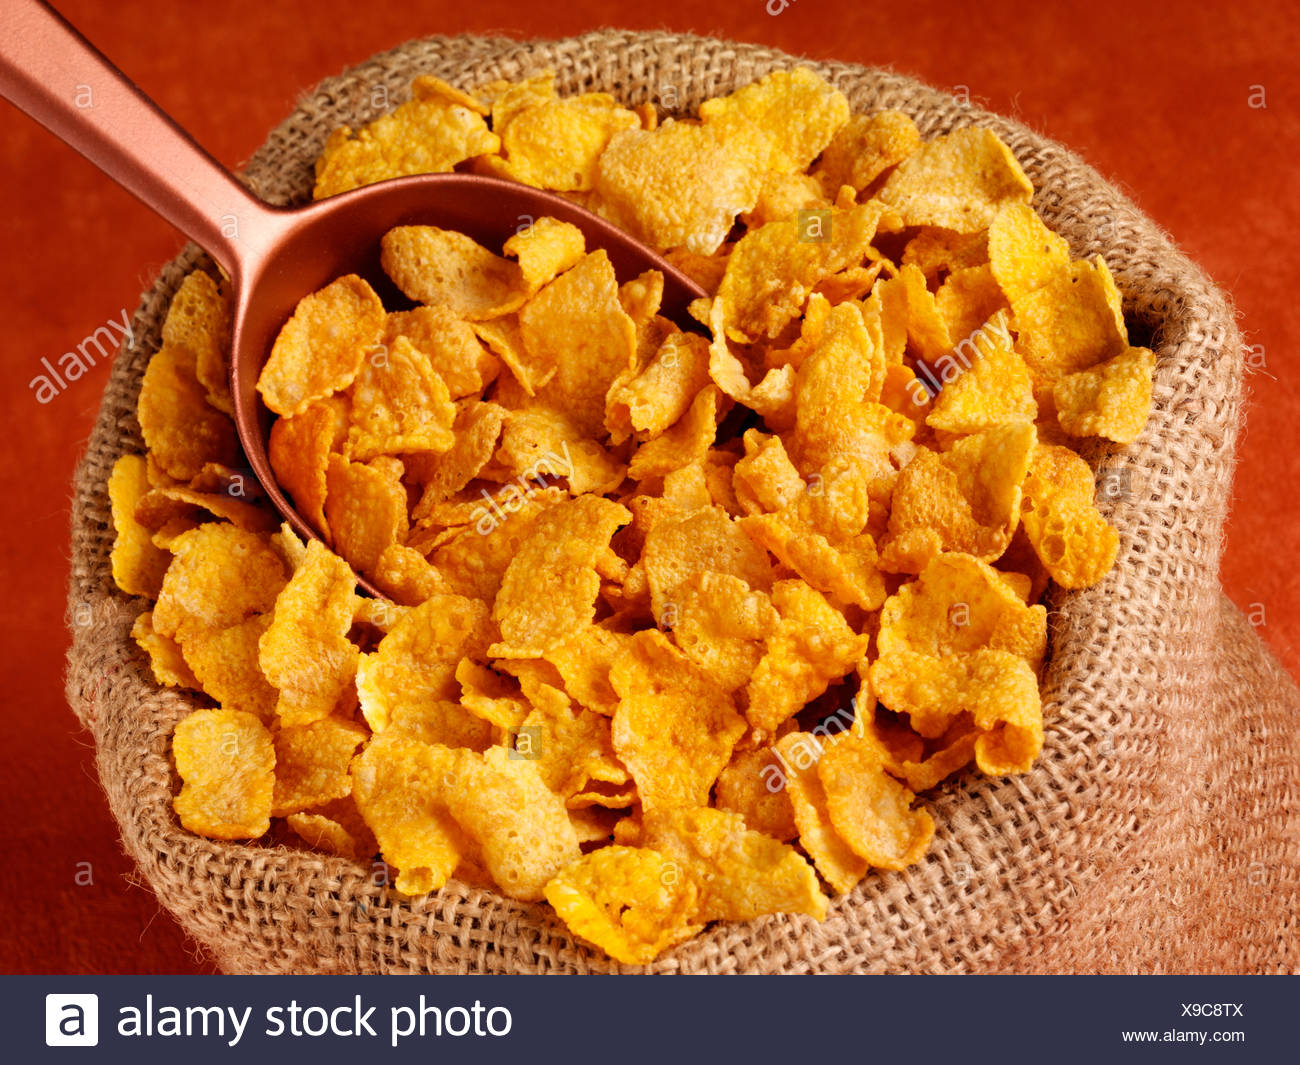 Download Bag Cornflakes High Resolution Stock Photography And Images Alamy Yellowimages Mockups